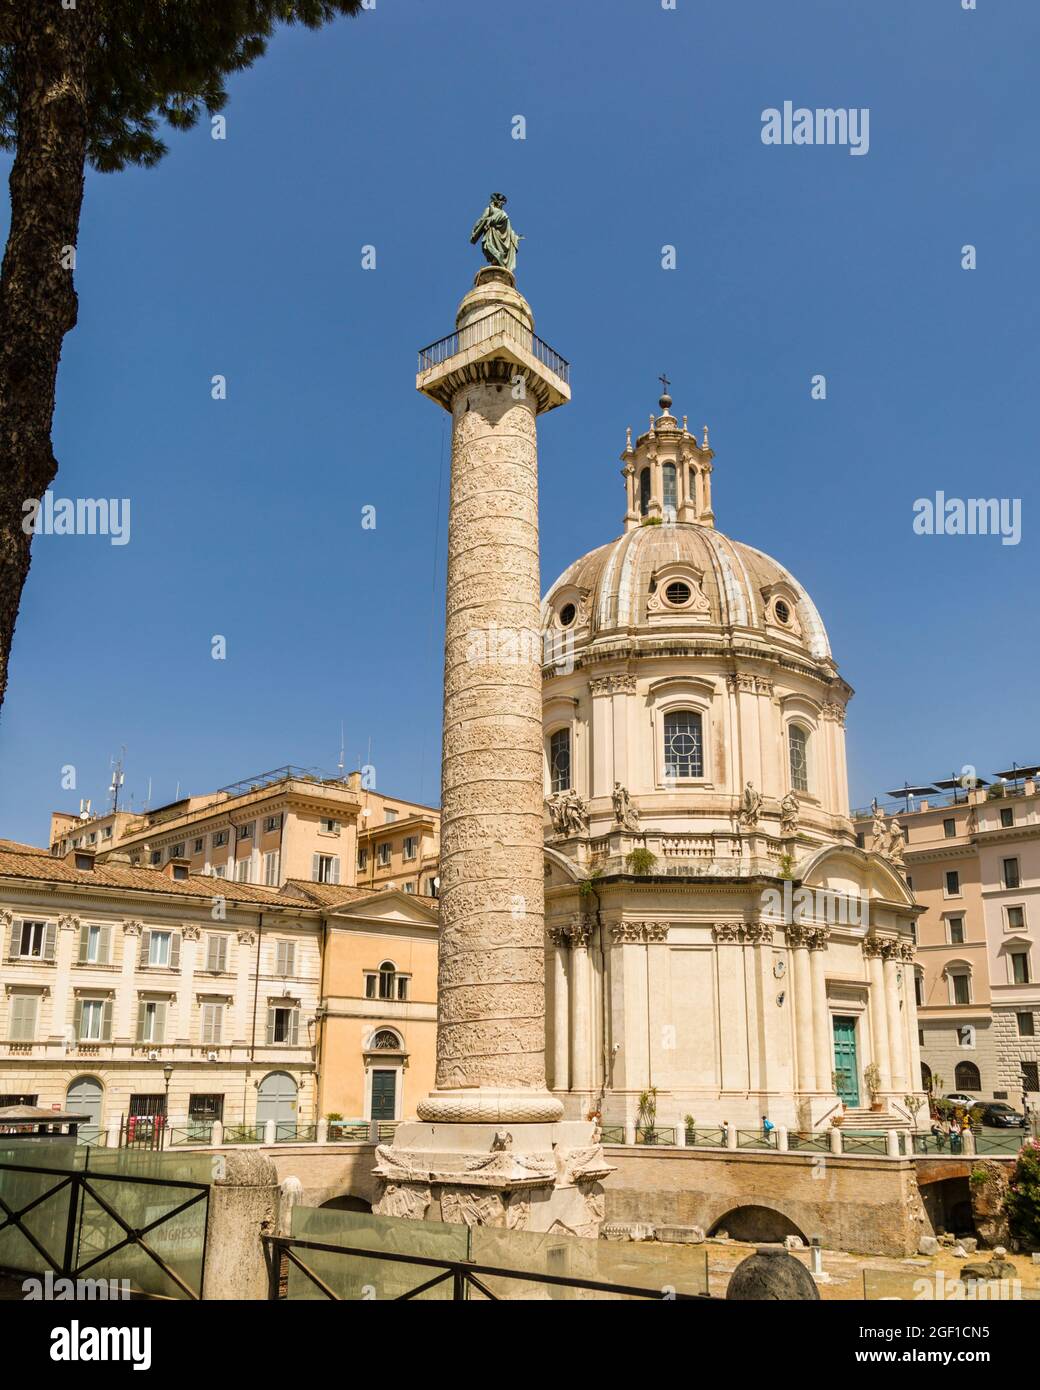 Trajan's Column, with The Church of the Most Holy Name of Mary in the background, Rome, Italy Stock Photo